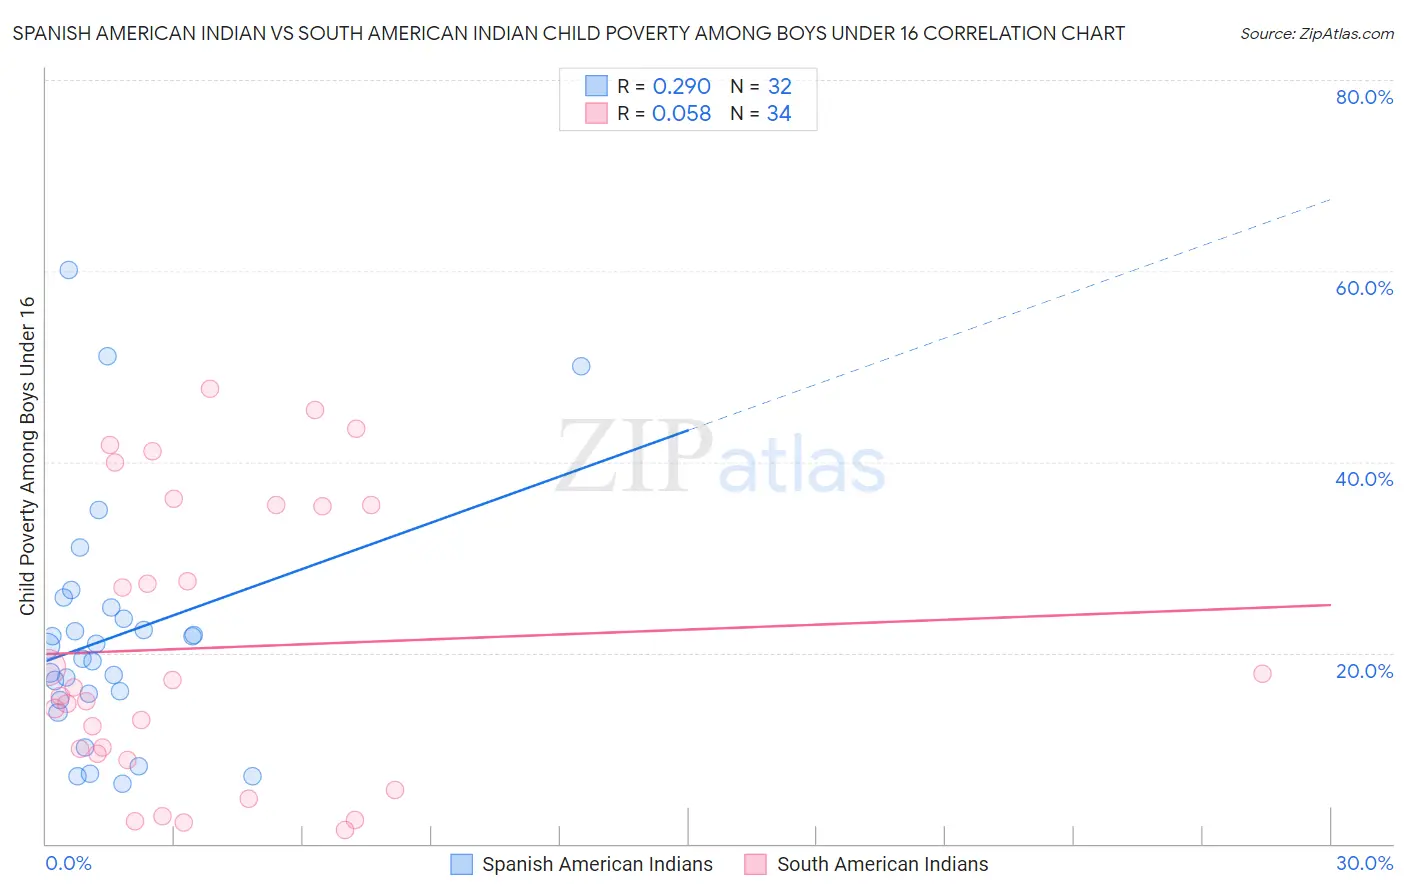 Spanish American Indian vs South American Indian Child Poverty Among Boys Under 16